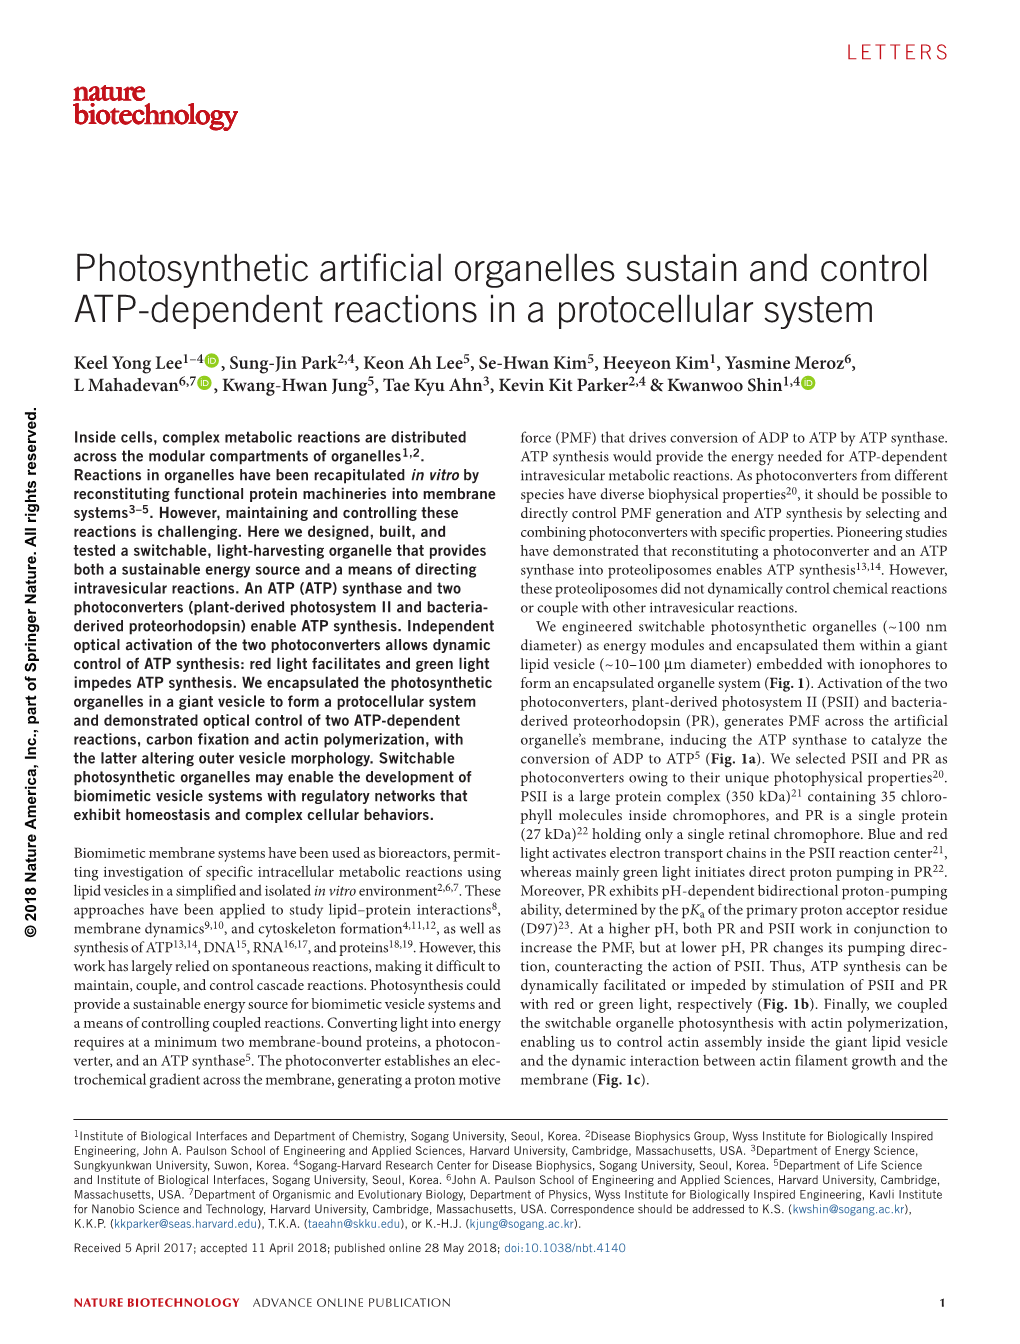 Photosynthetic Artificial Organelles Sustain and Control ATP-Dependent